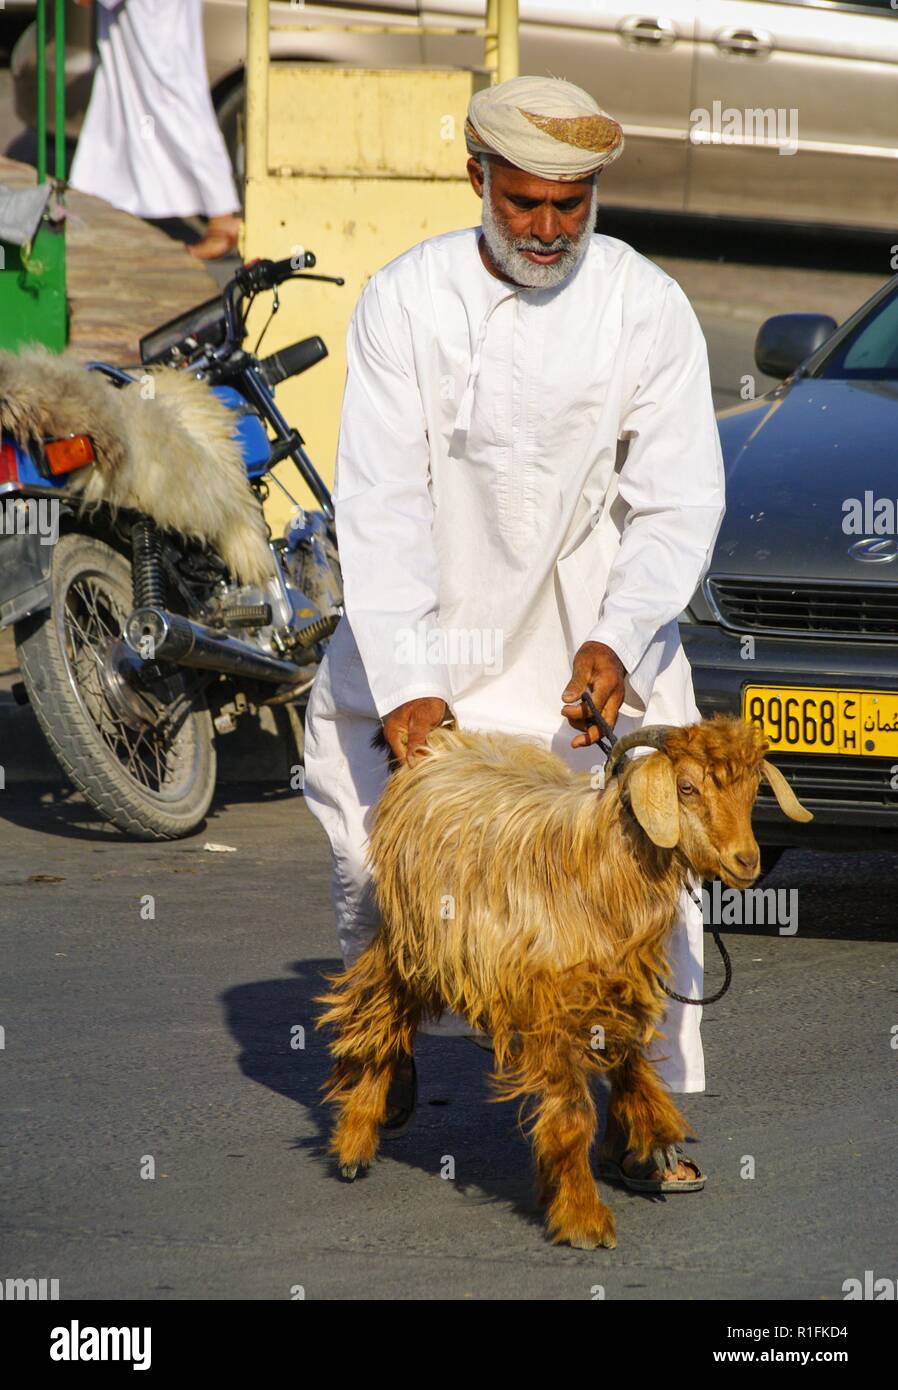 Nizwa, Oman. 23rd Nov, 2012. In Nizwa, an Omani pushes a goat, which he has just bought at the famous cattle market, to his vehicle. | usage worldwide Credit: dpa/Alamy Live News Stock Photo